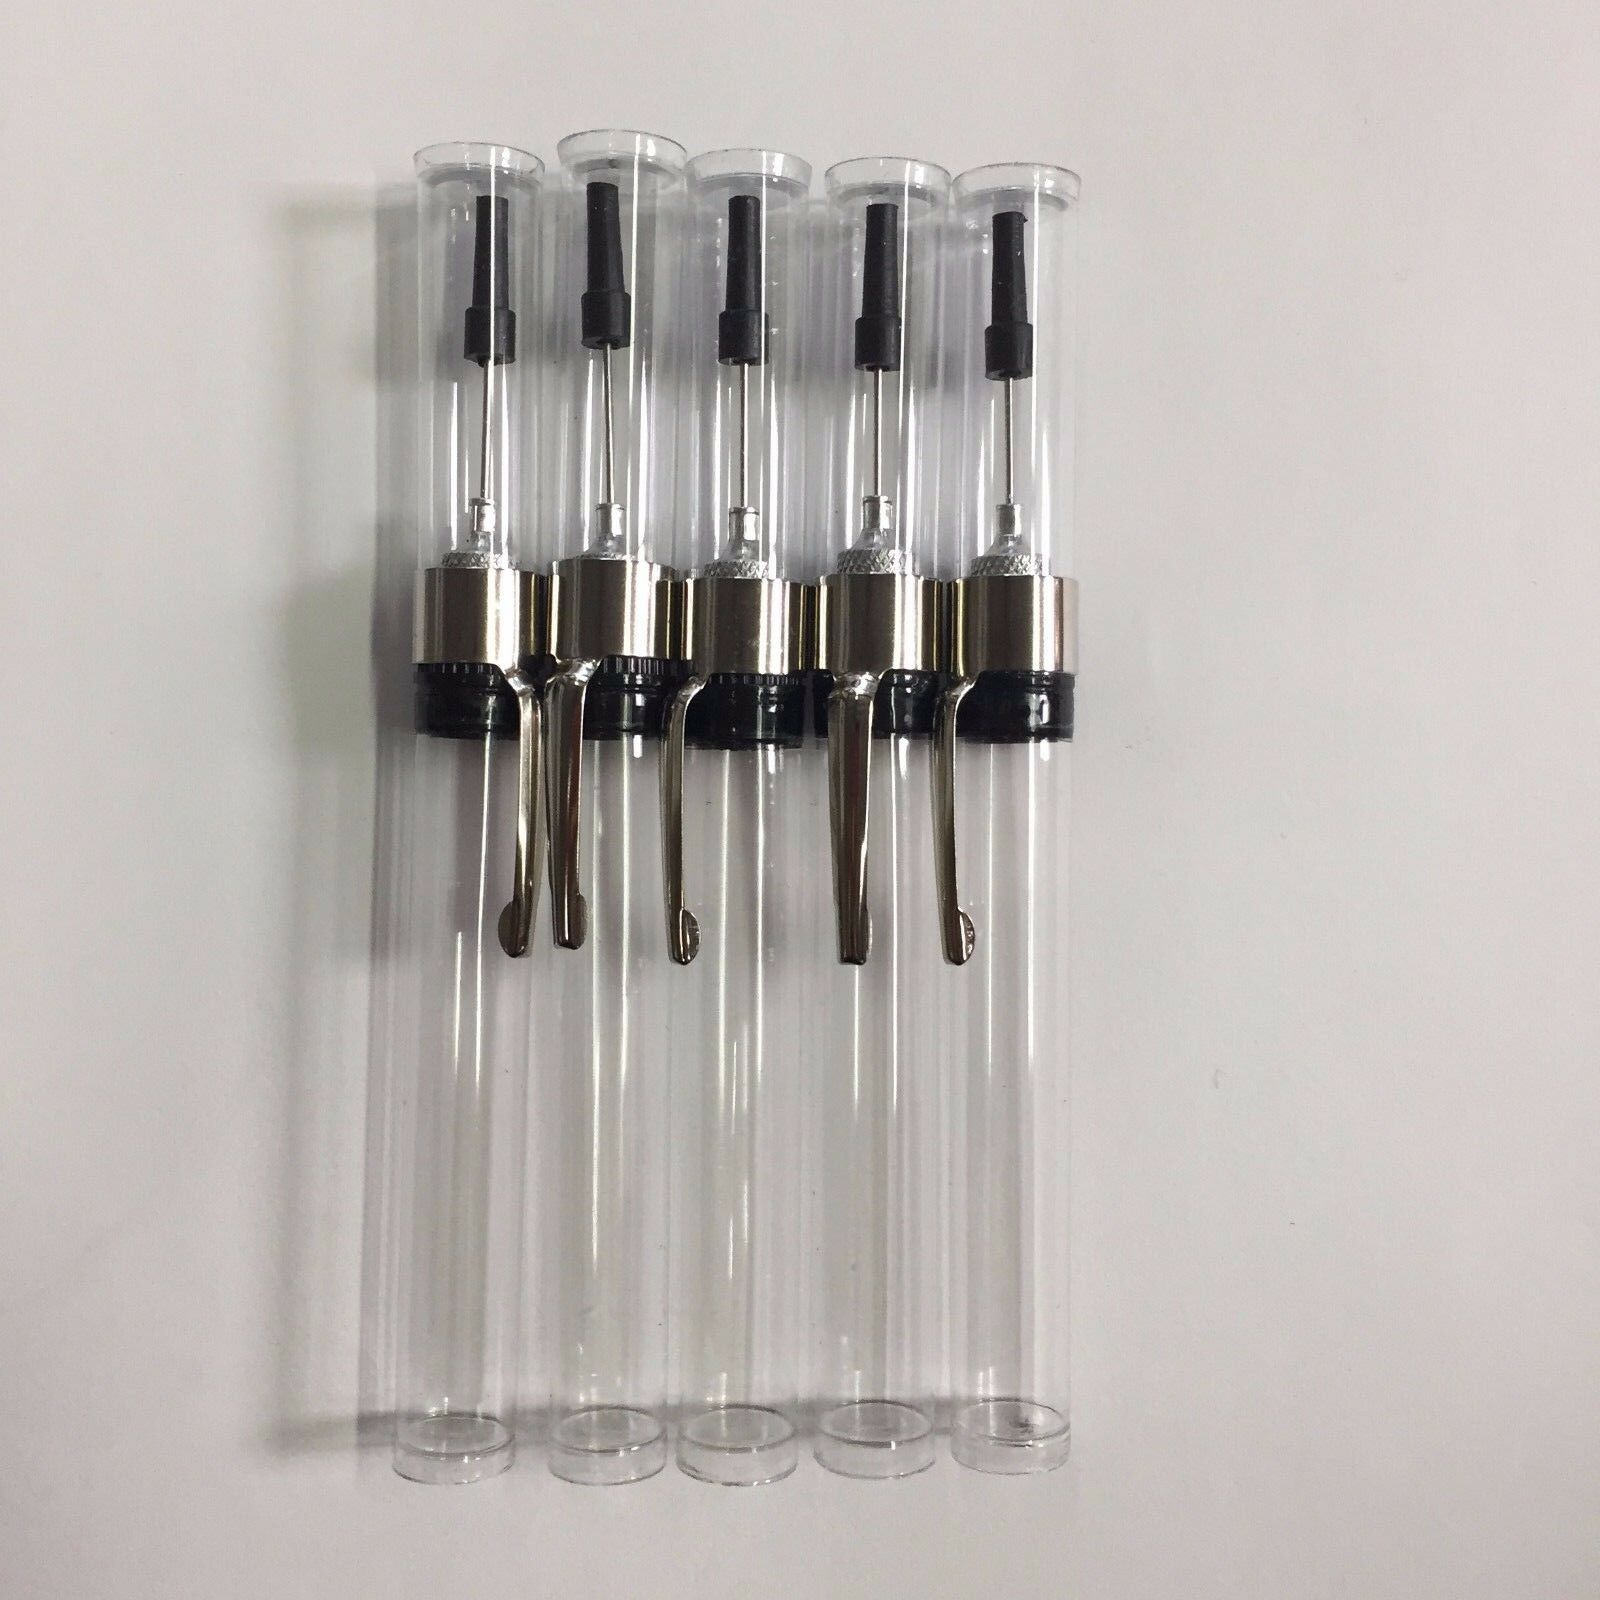 5 Each Refillable Precision Needle Point Oiler Without Oil (empty) Ew2132a